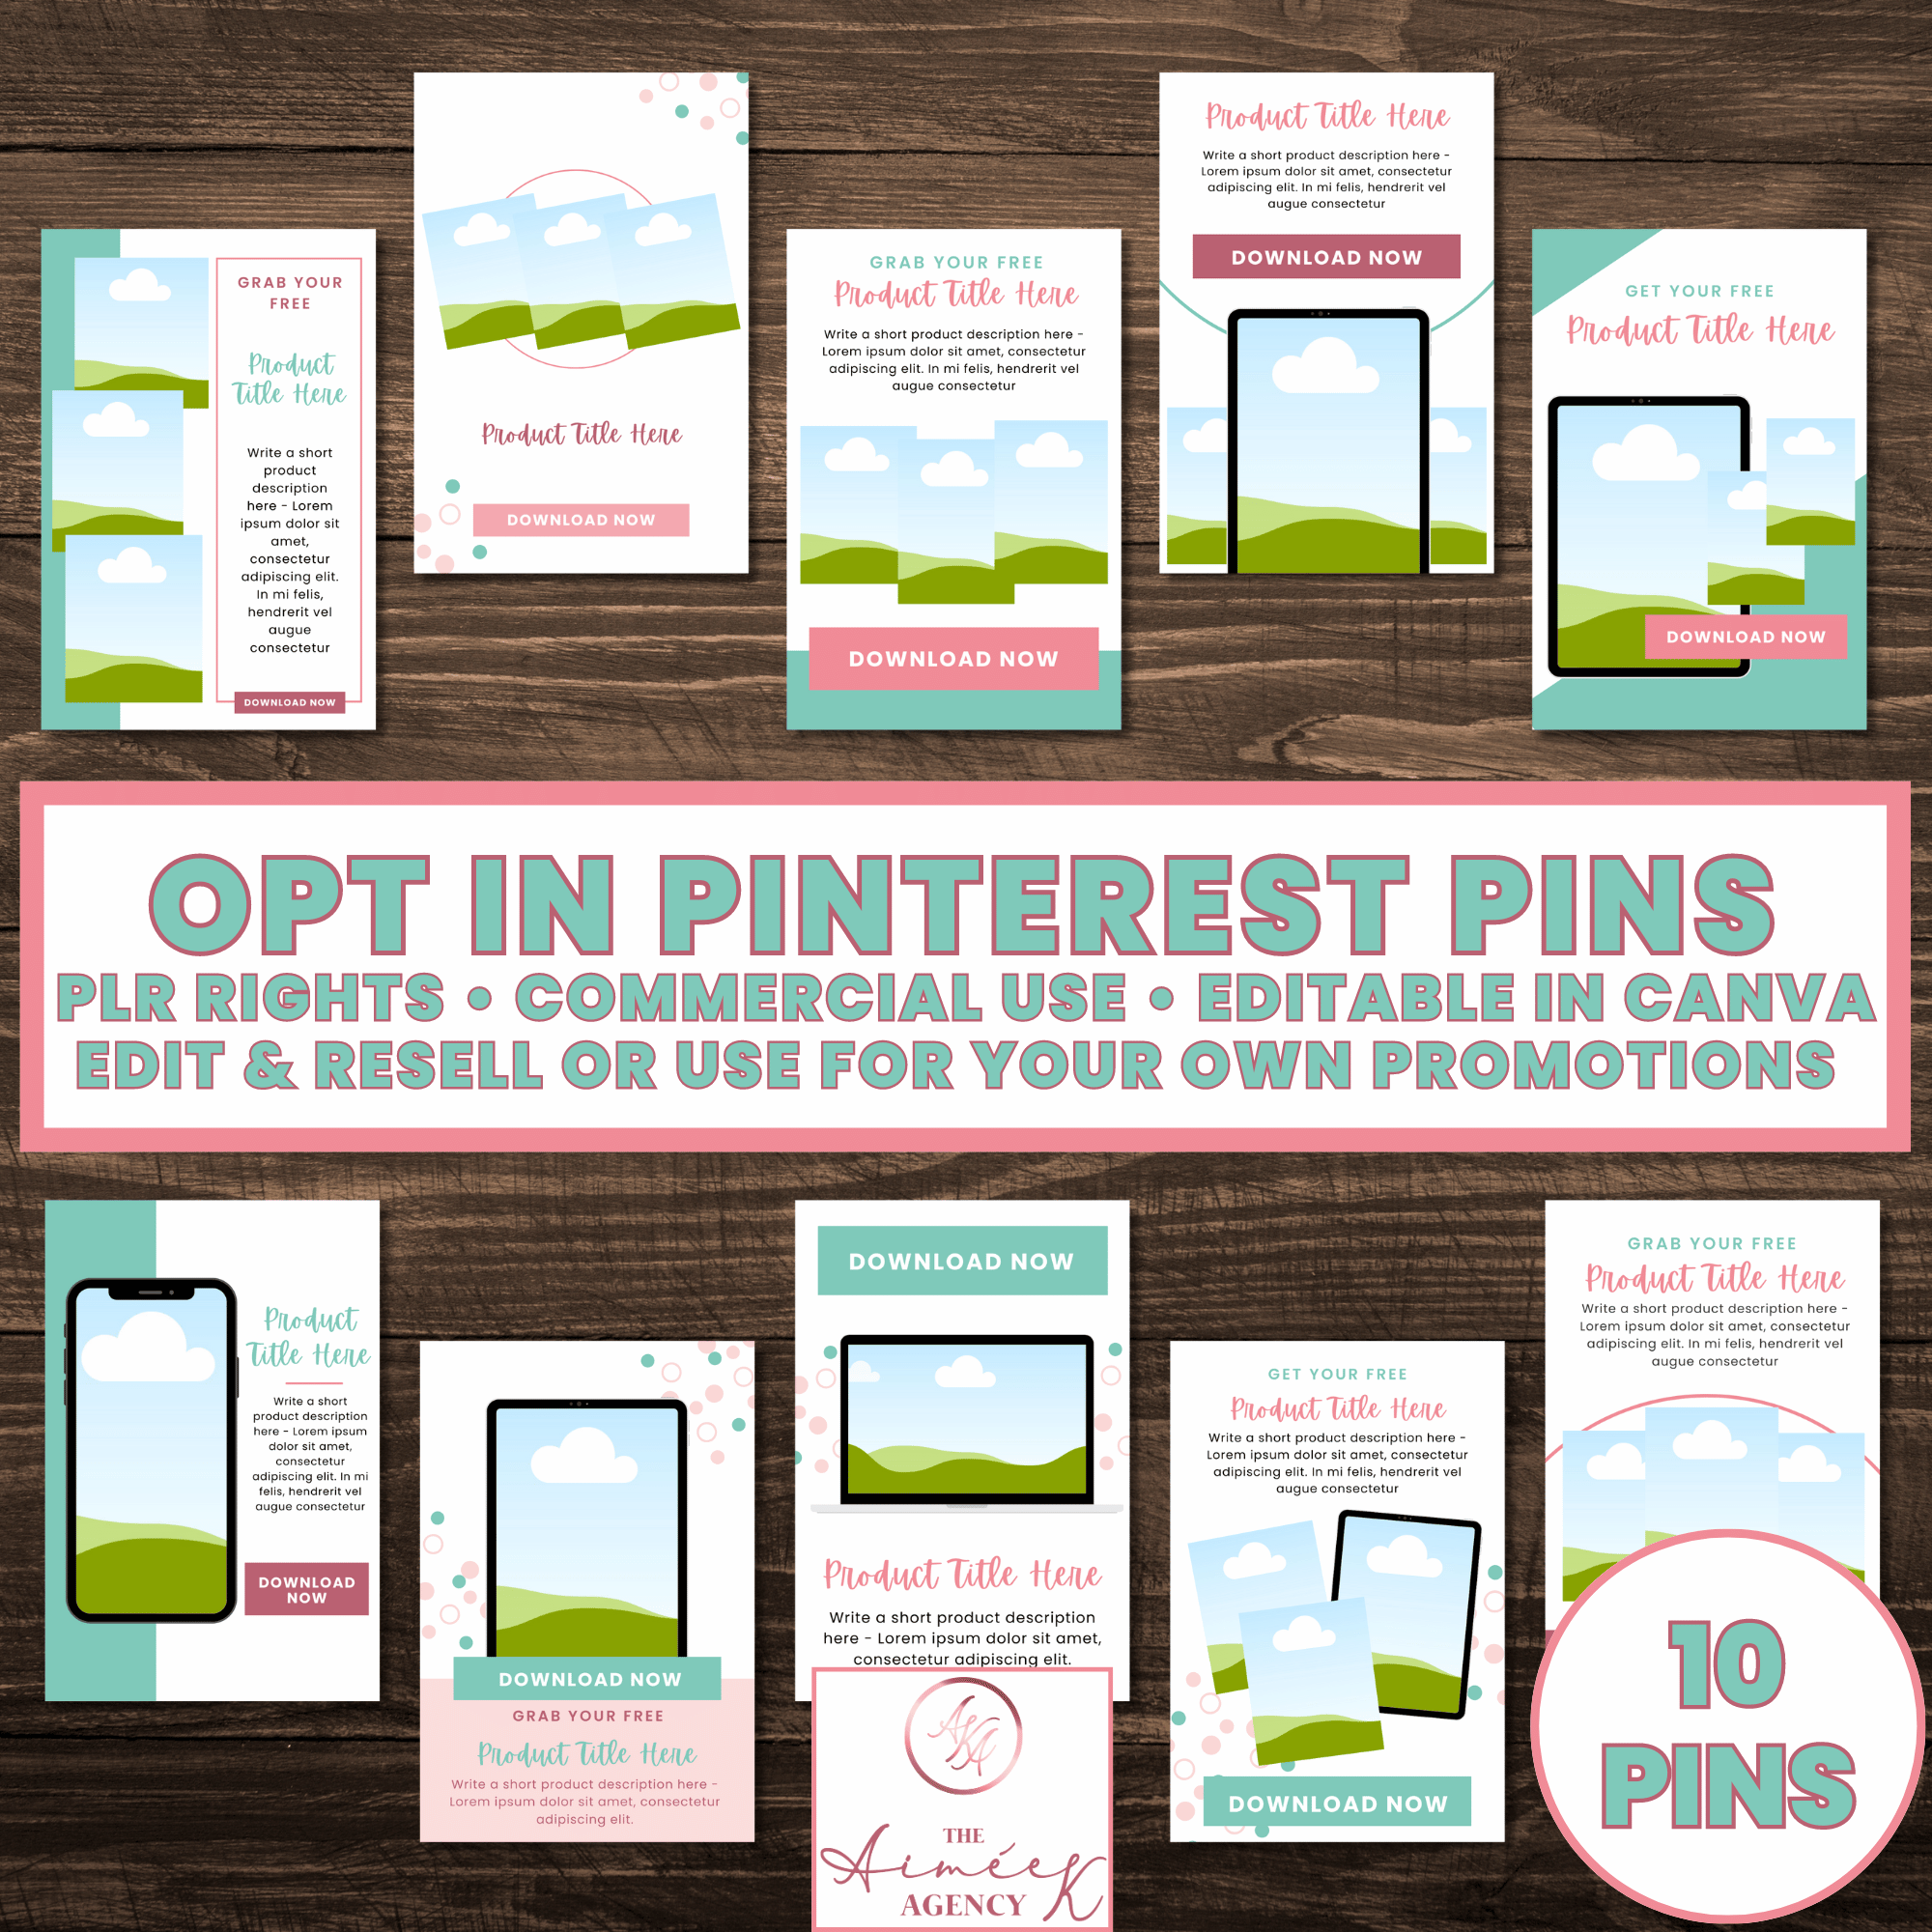 A set of Pinterest pin templates featuring editable designs with text overlays and graphics showcasing product promotions. The text highlights "Opt-in Pinterest Pins" with PLR rights and commercial use.